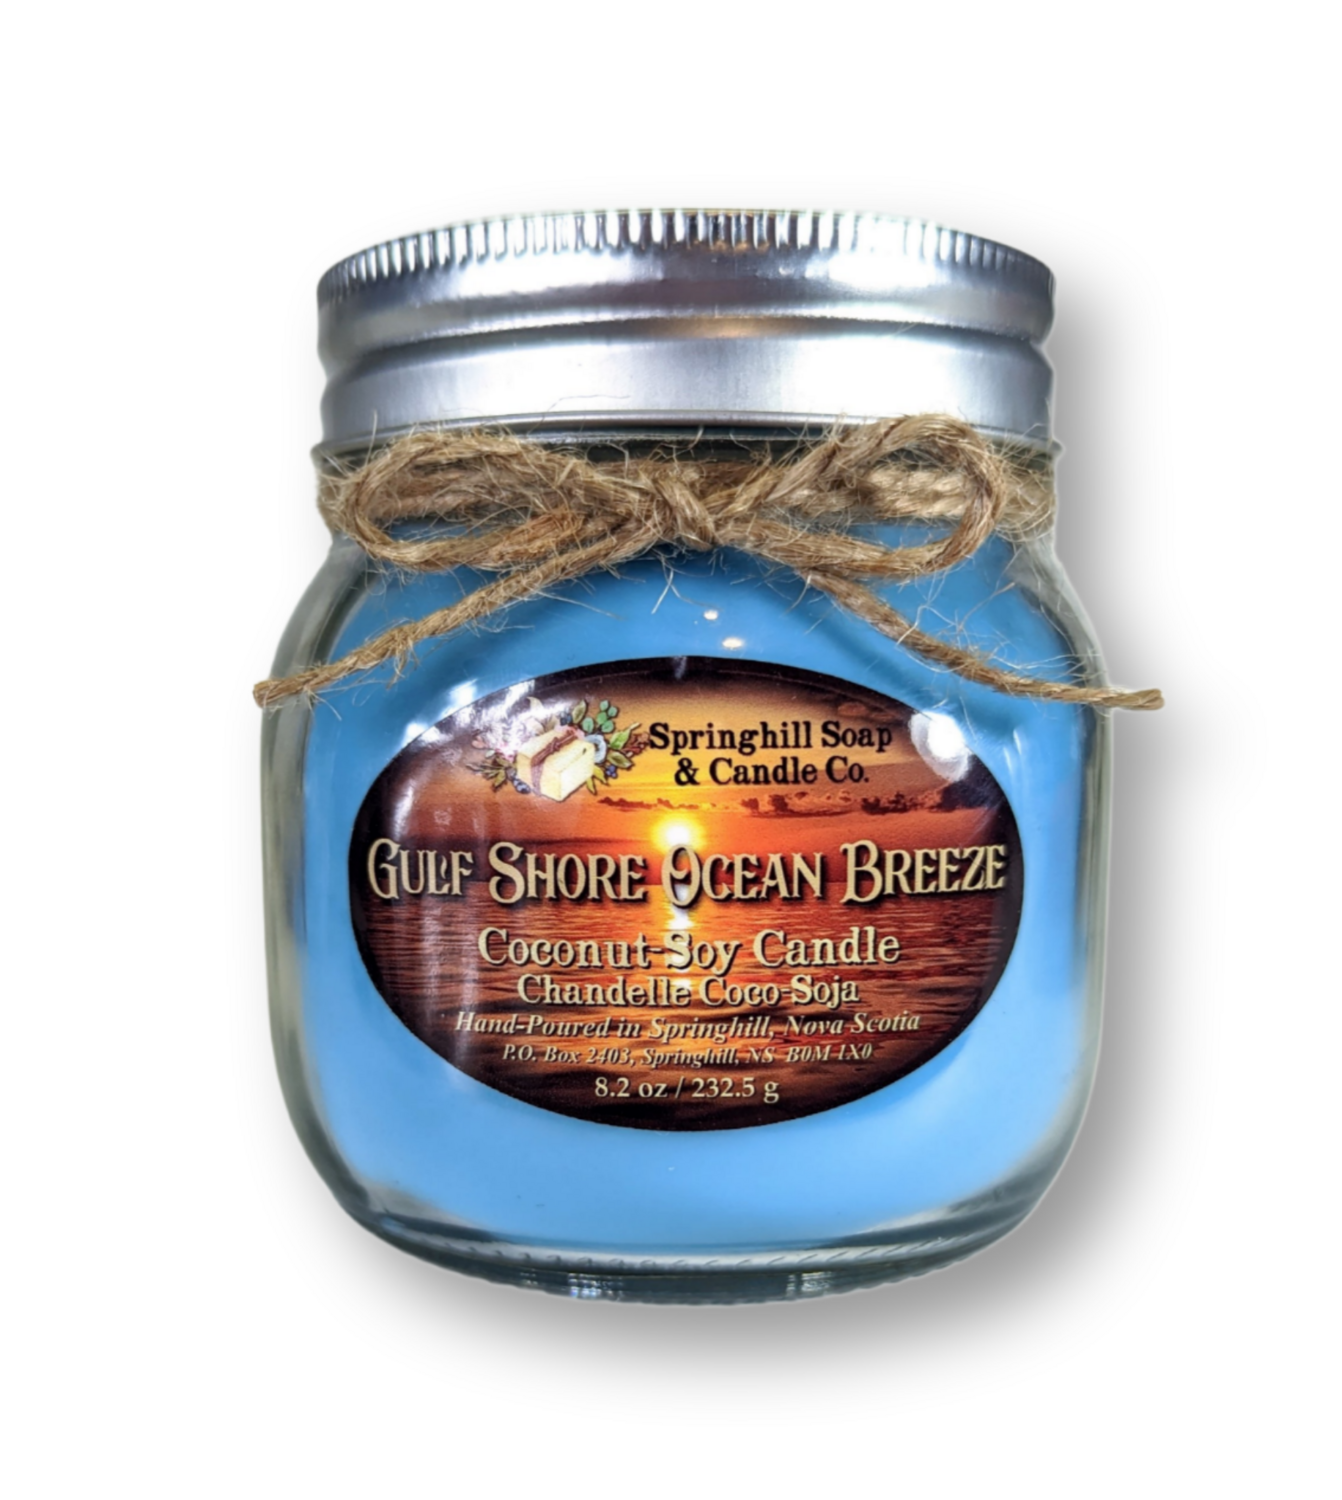 Gulf Shore Ocean Breeze 8.2oz Coconut-Soy Candle